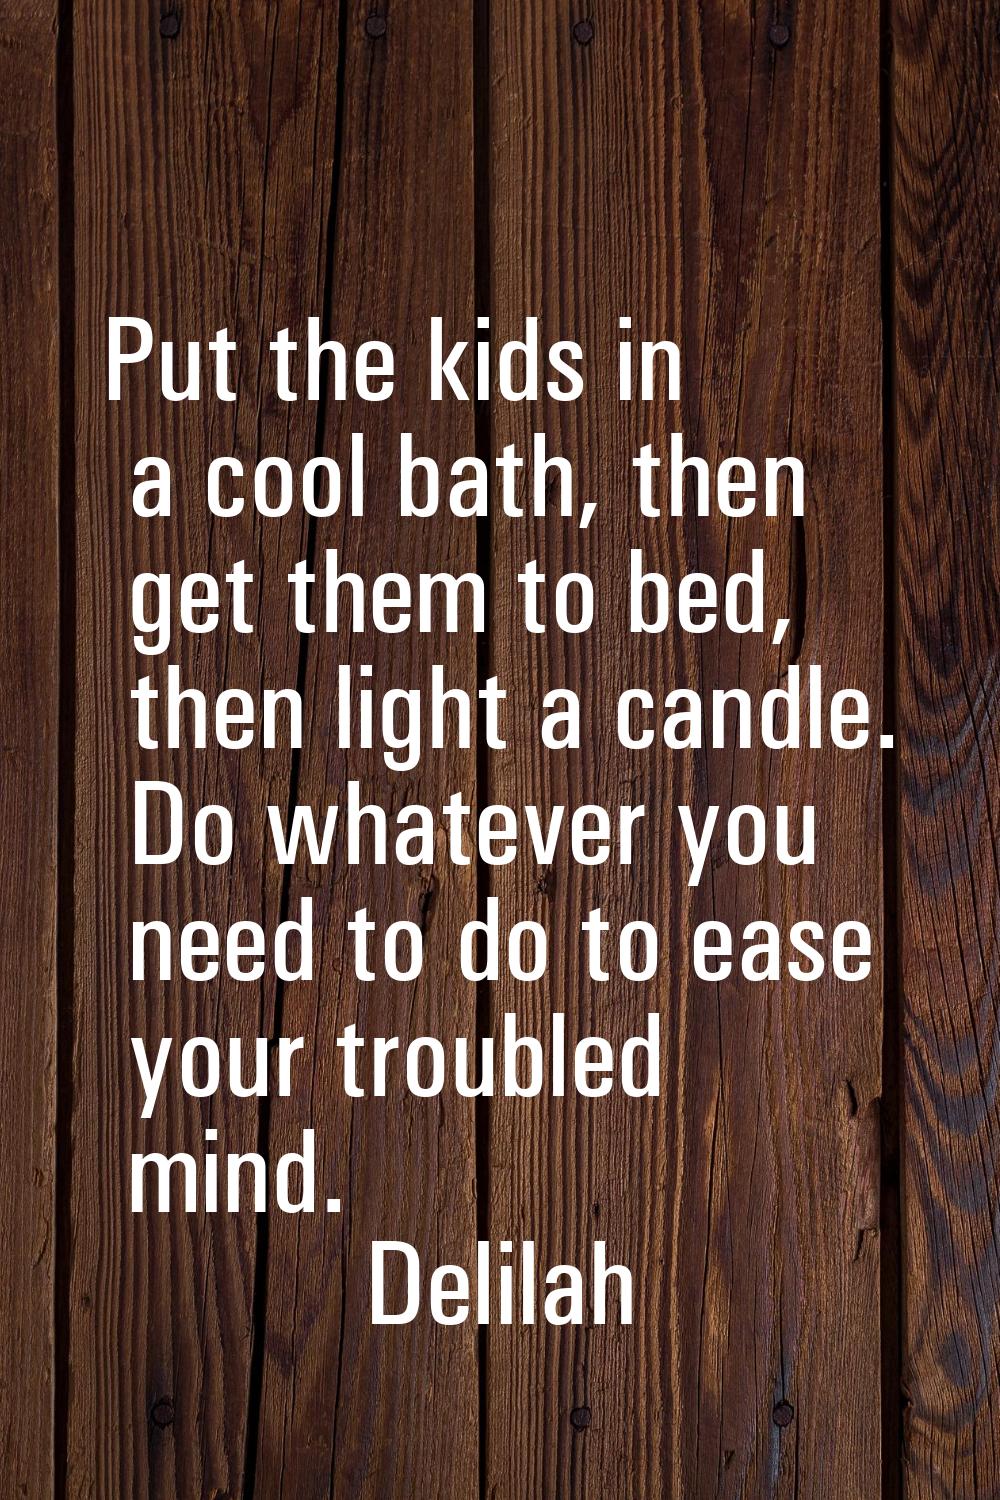 Put the kids in a cool bath, then get them to bed, then light a candle. Do whatever you need to do 